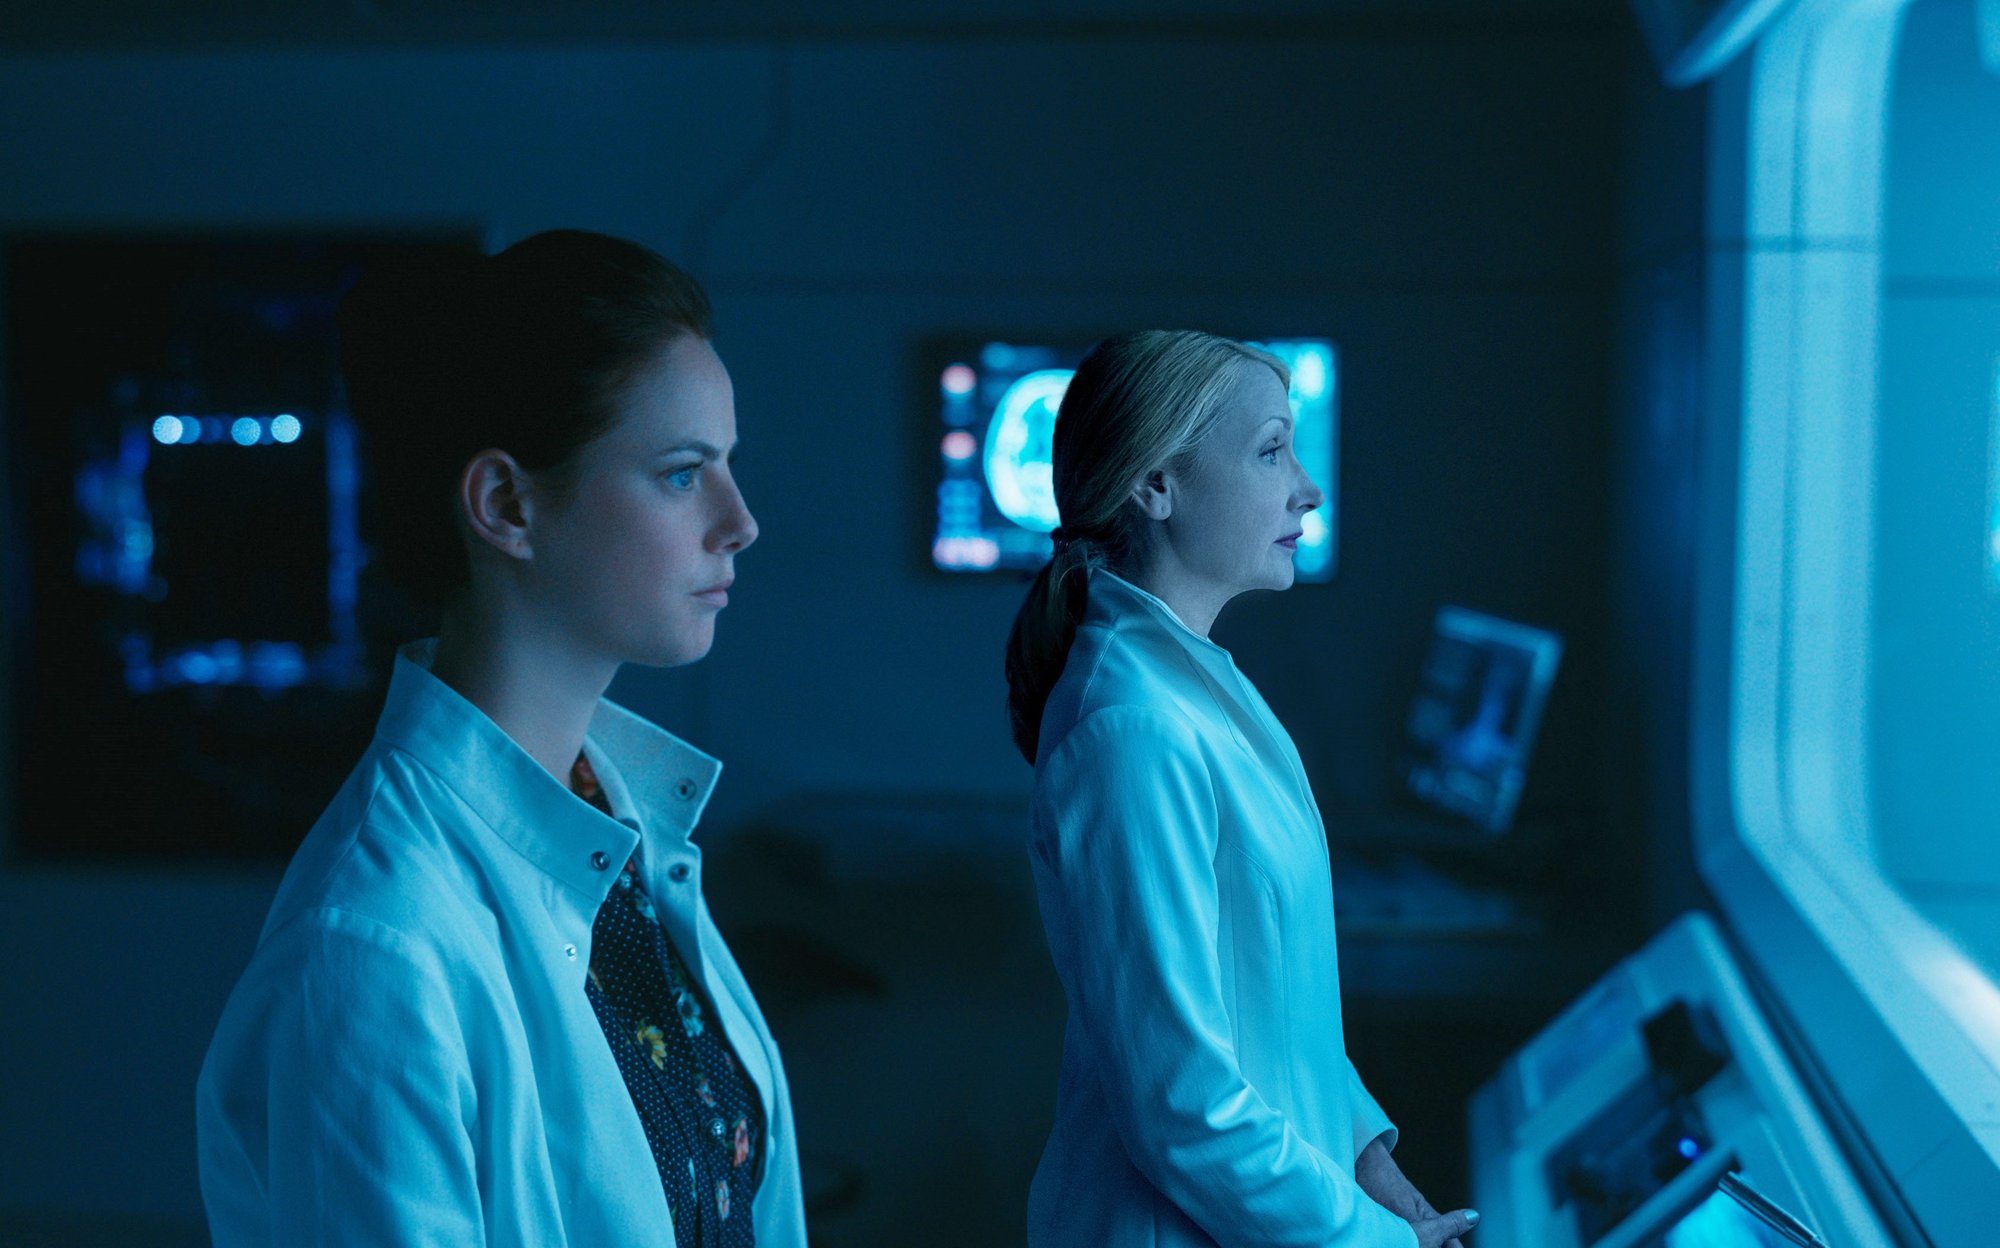 Kaya Scodelario stars as Teresa and Patricia Clarkson stars as Ava Paige in 20th Century Fox's Maze Runner: The Death Cure (2018)